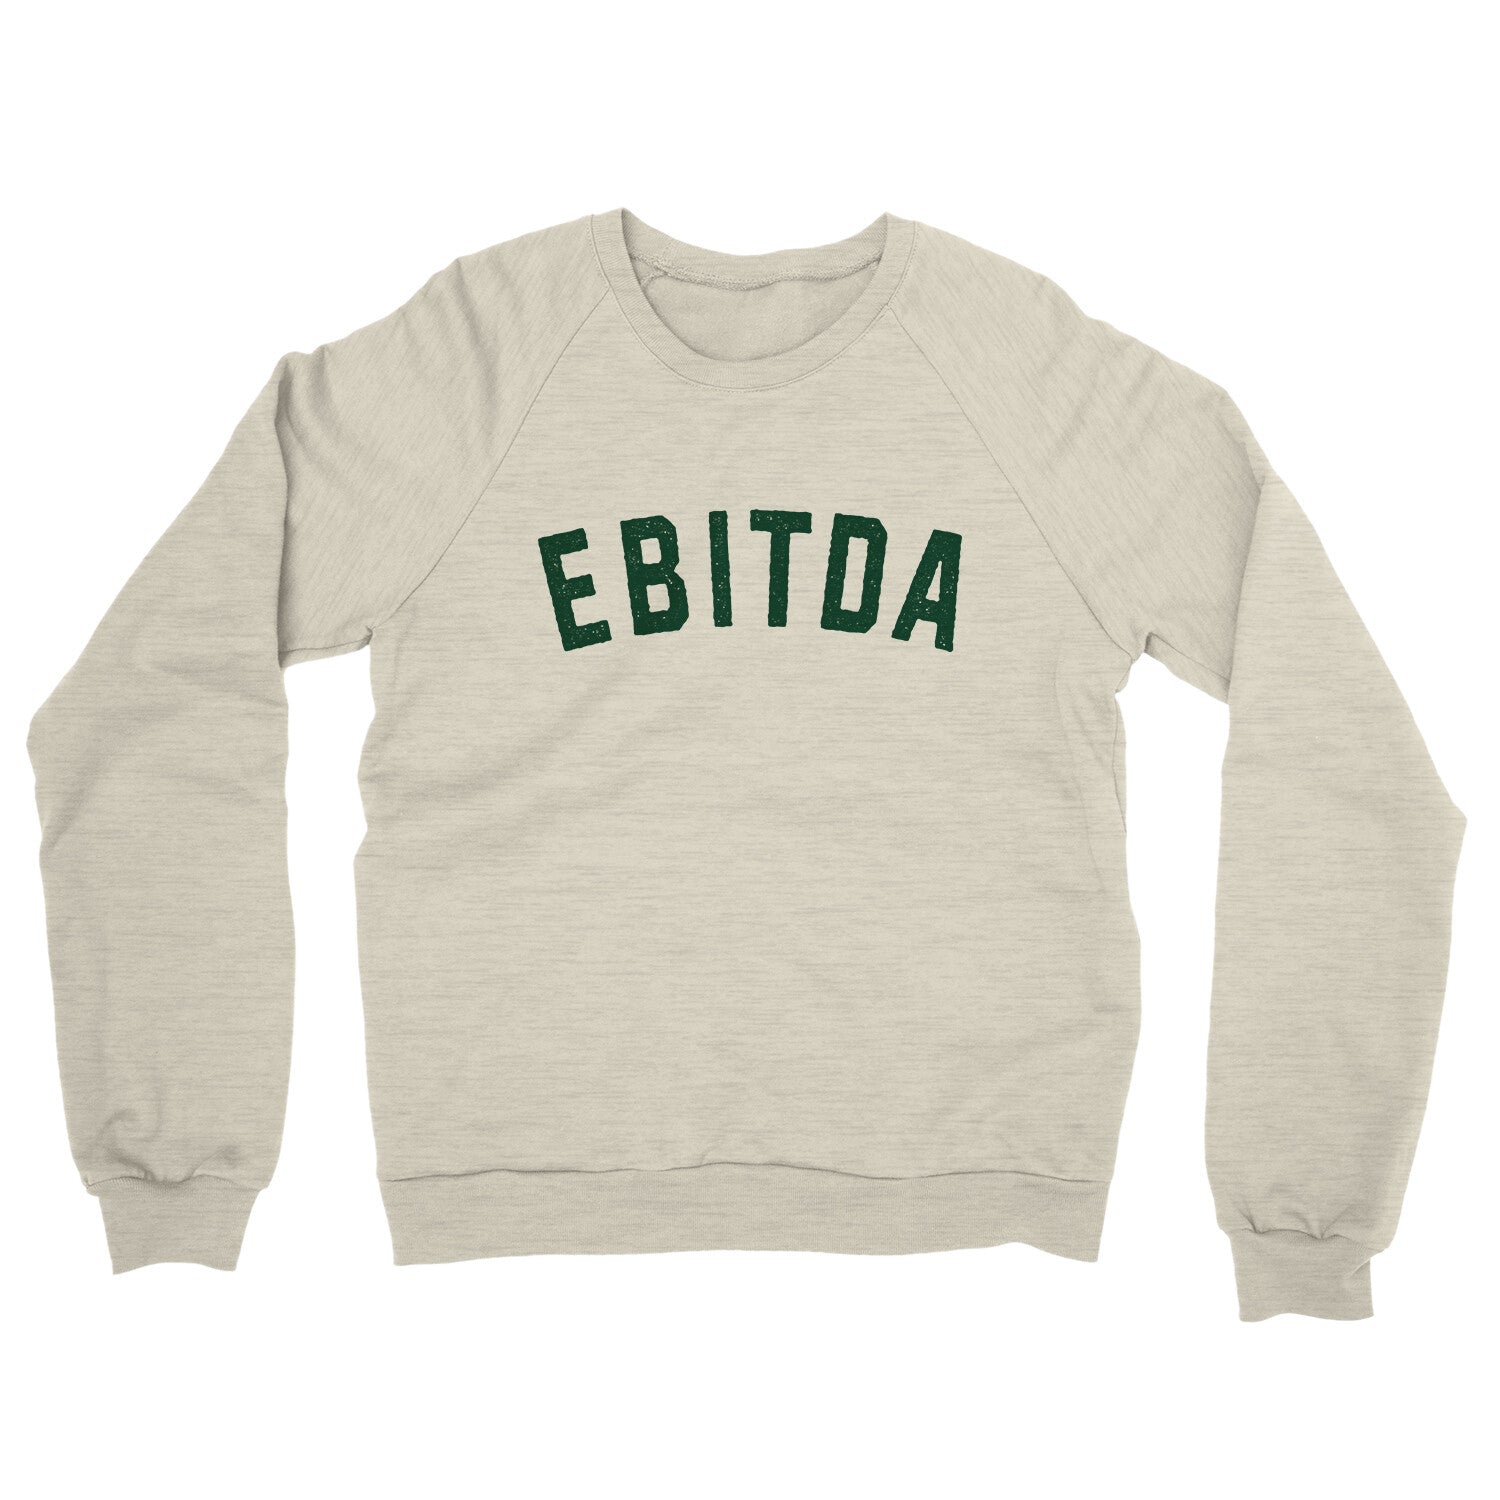 EBITDA in Heather Oatmeal Color